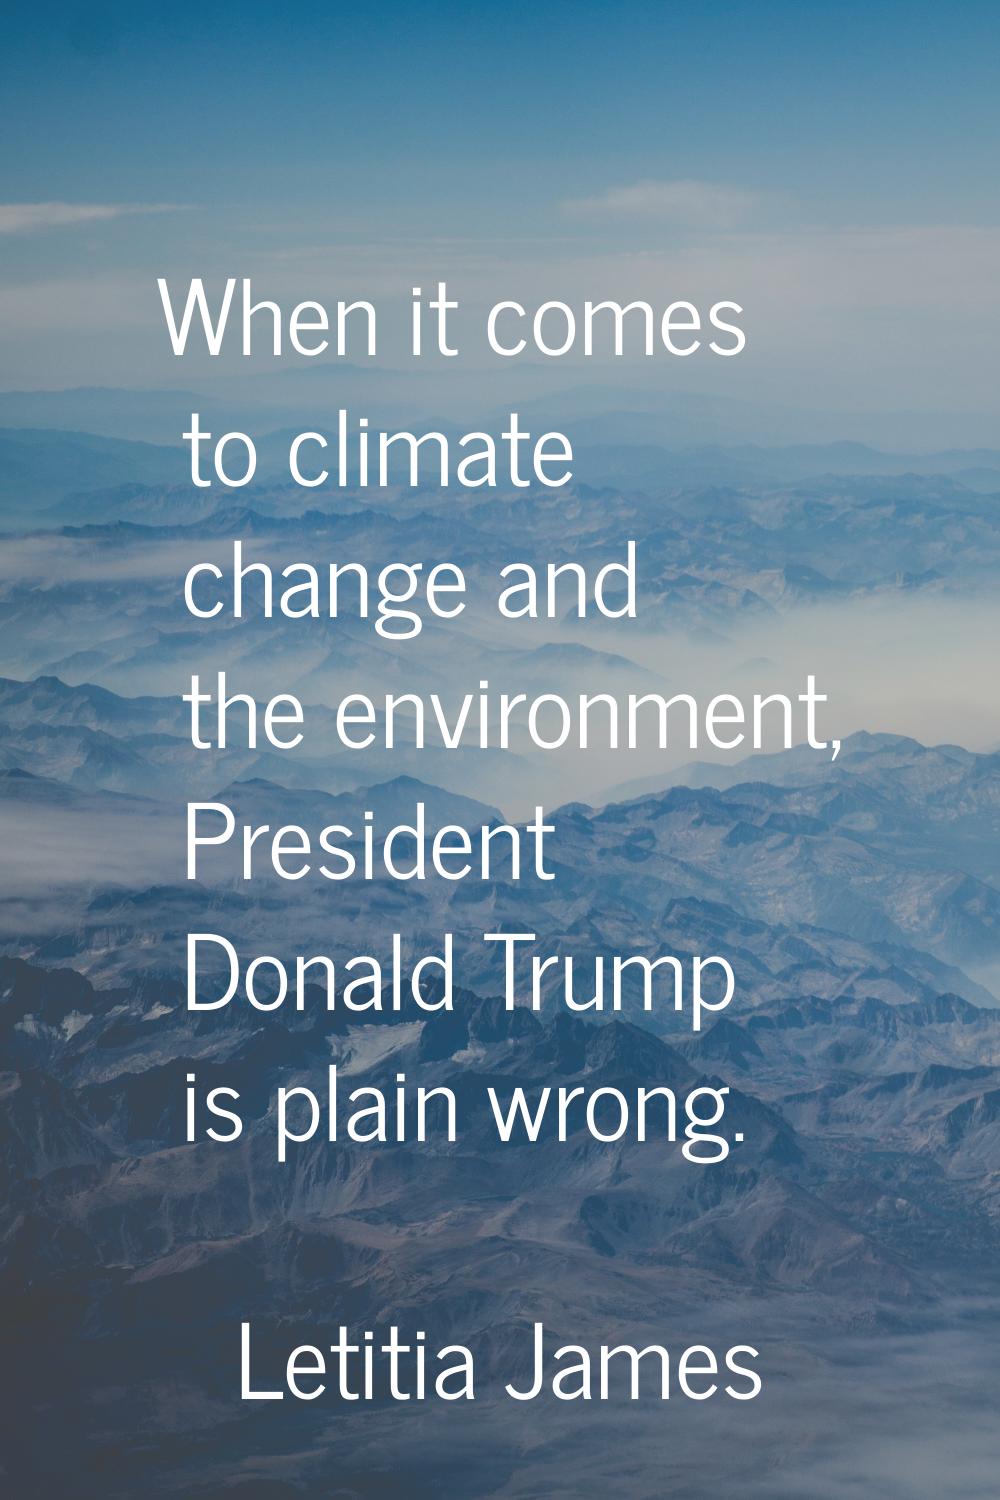 When it comes to climate change and the environment, President Donald Trump is plain wrong.